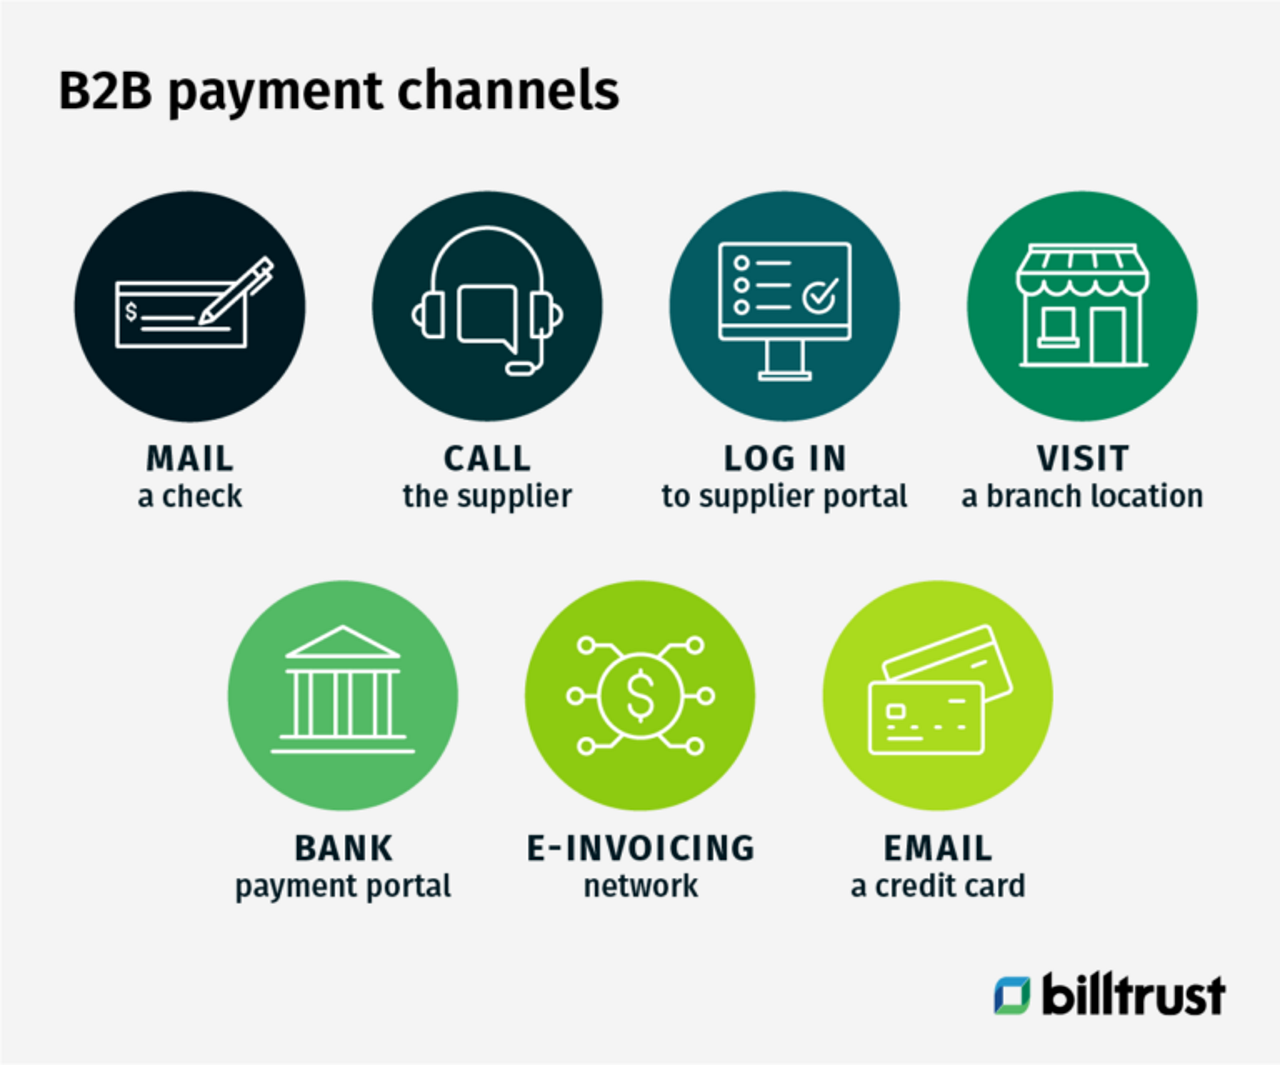 icons showing the seven different B2B payment channels